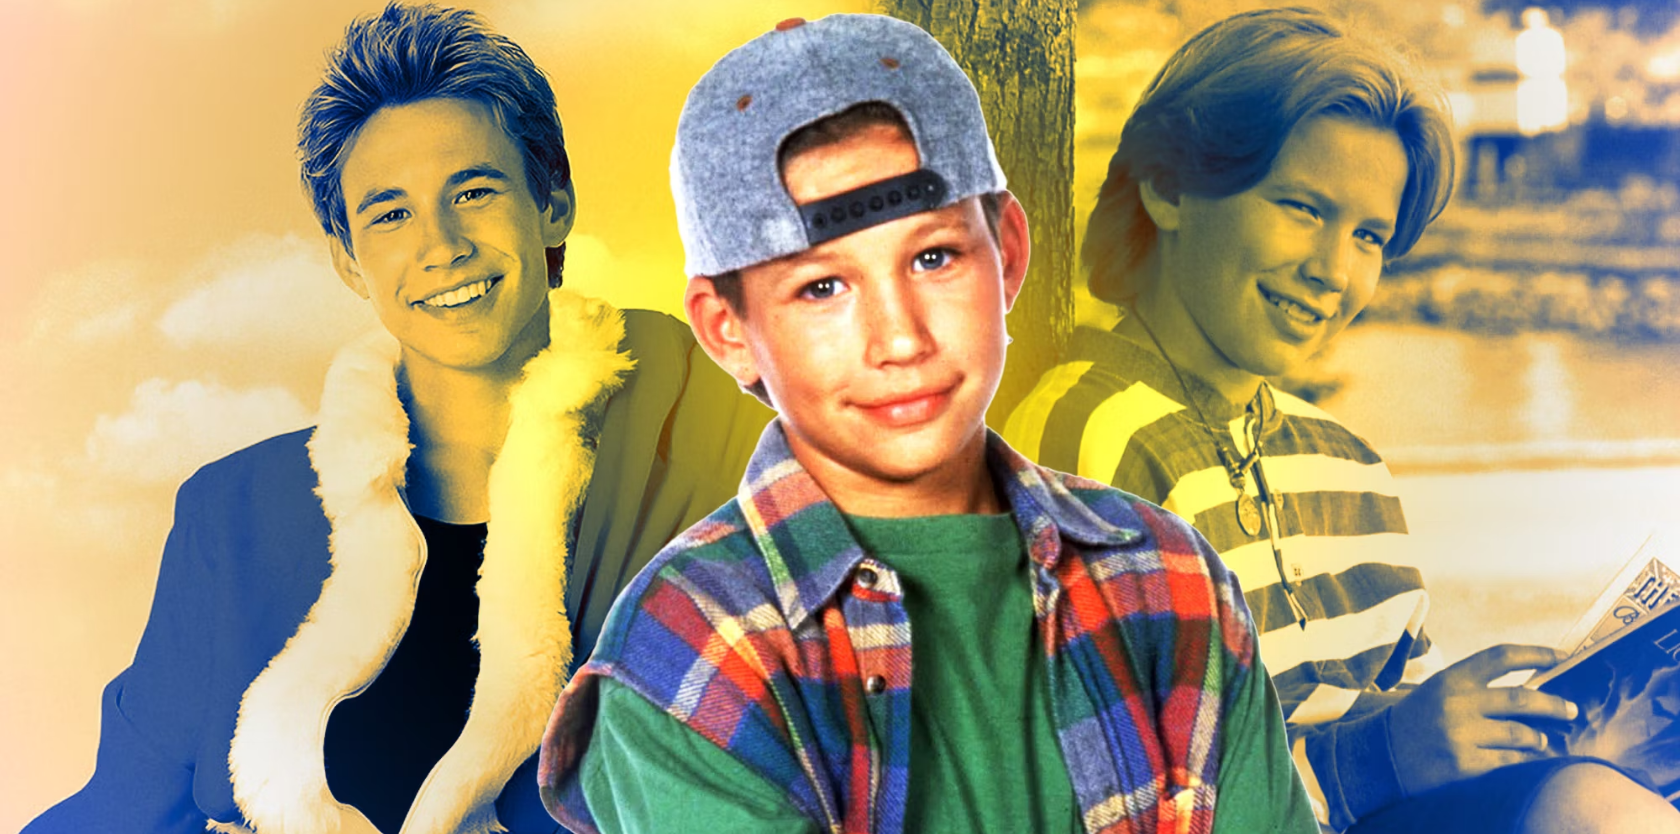 Jonathan Taylor Thomas at different ages